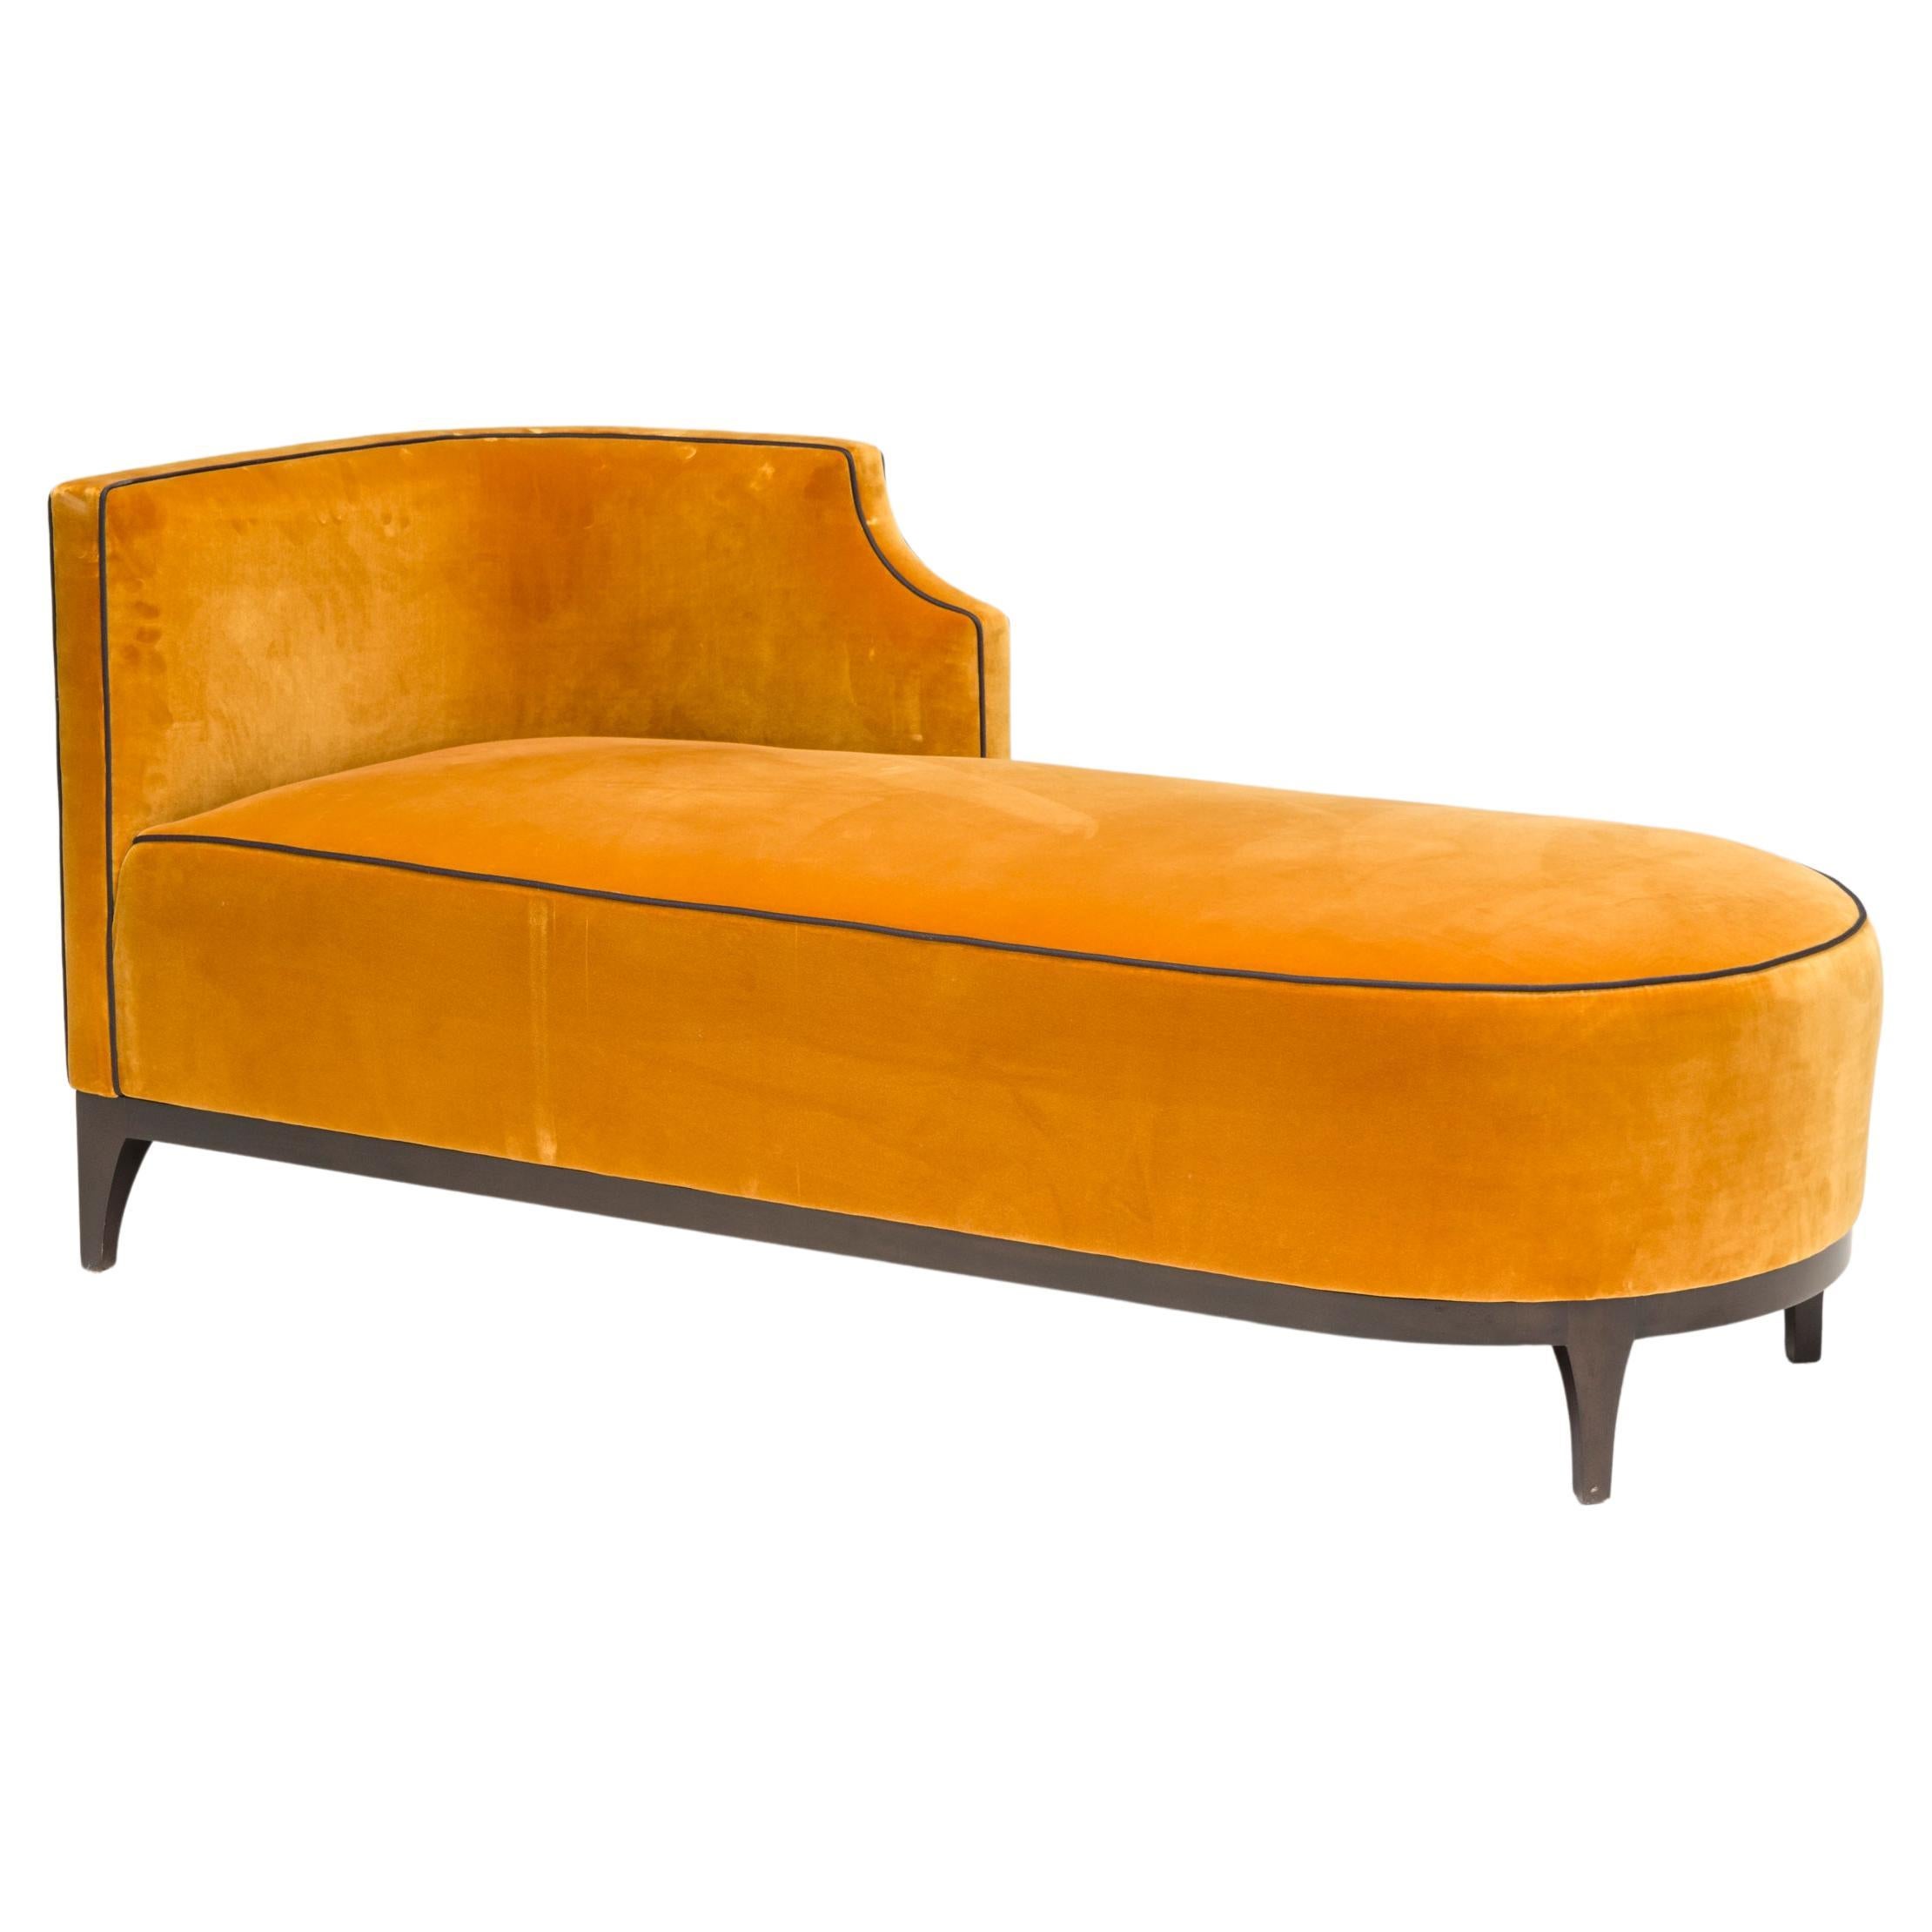 Bespoke Art Deco Style Mustard Yellow Velvet Chaise Longue With Grey Piping  For Sale